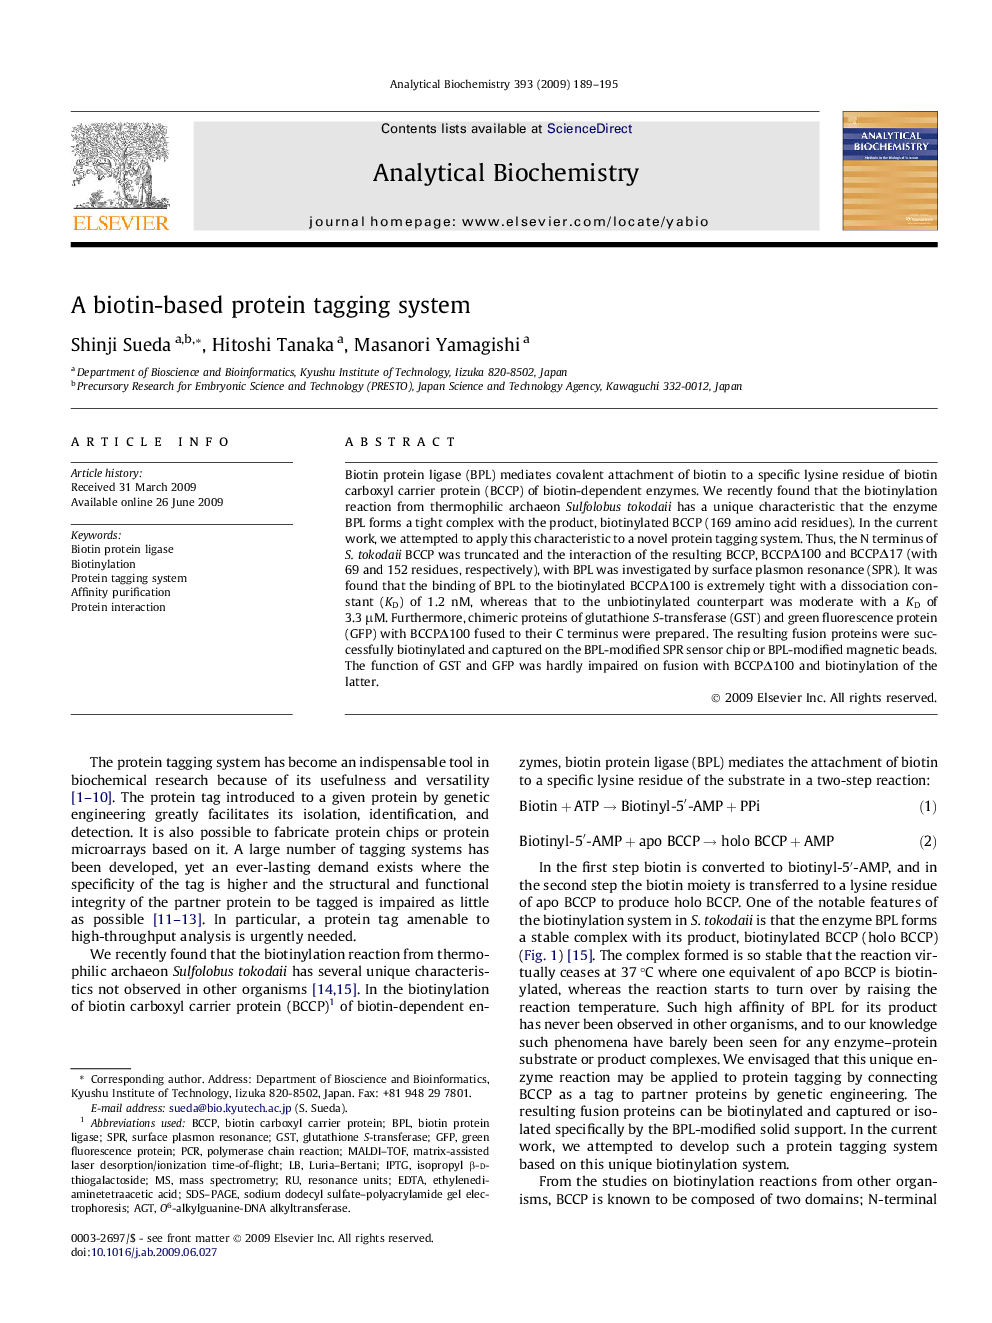 A biotin-based protein tagging system